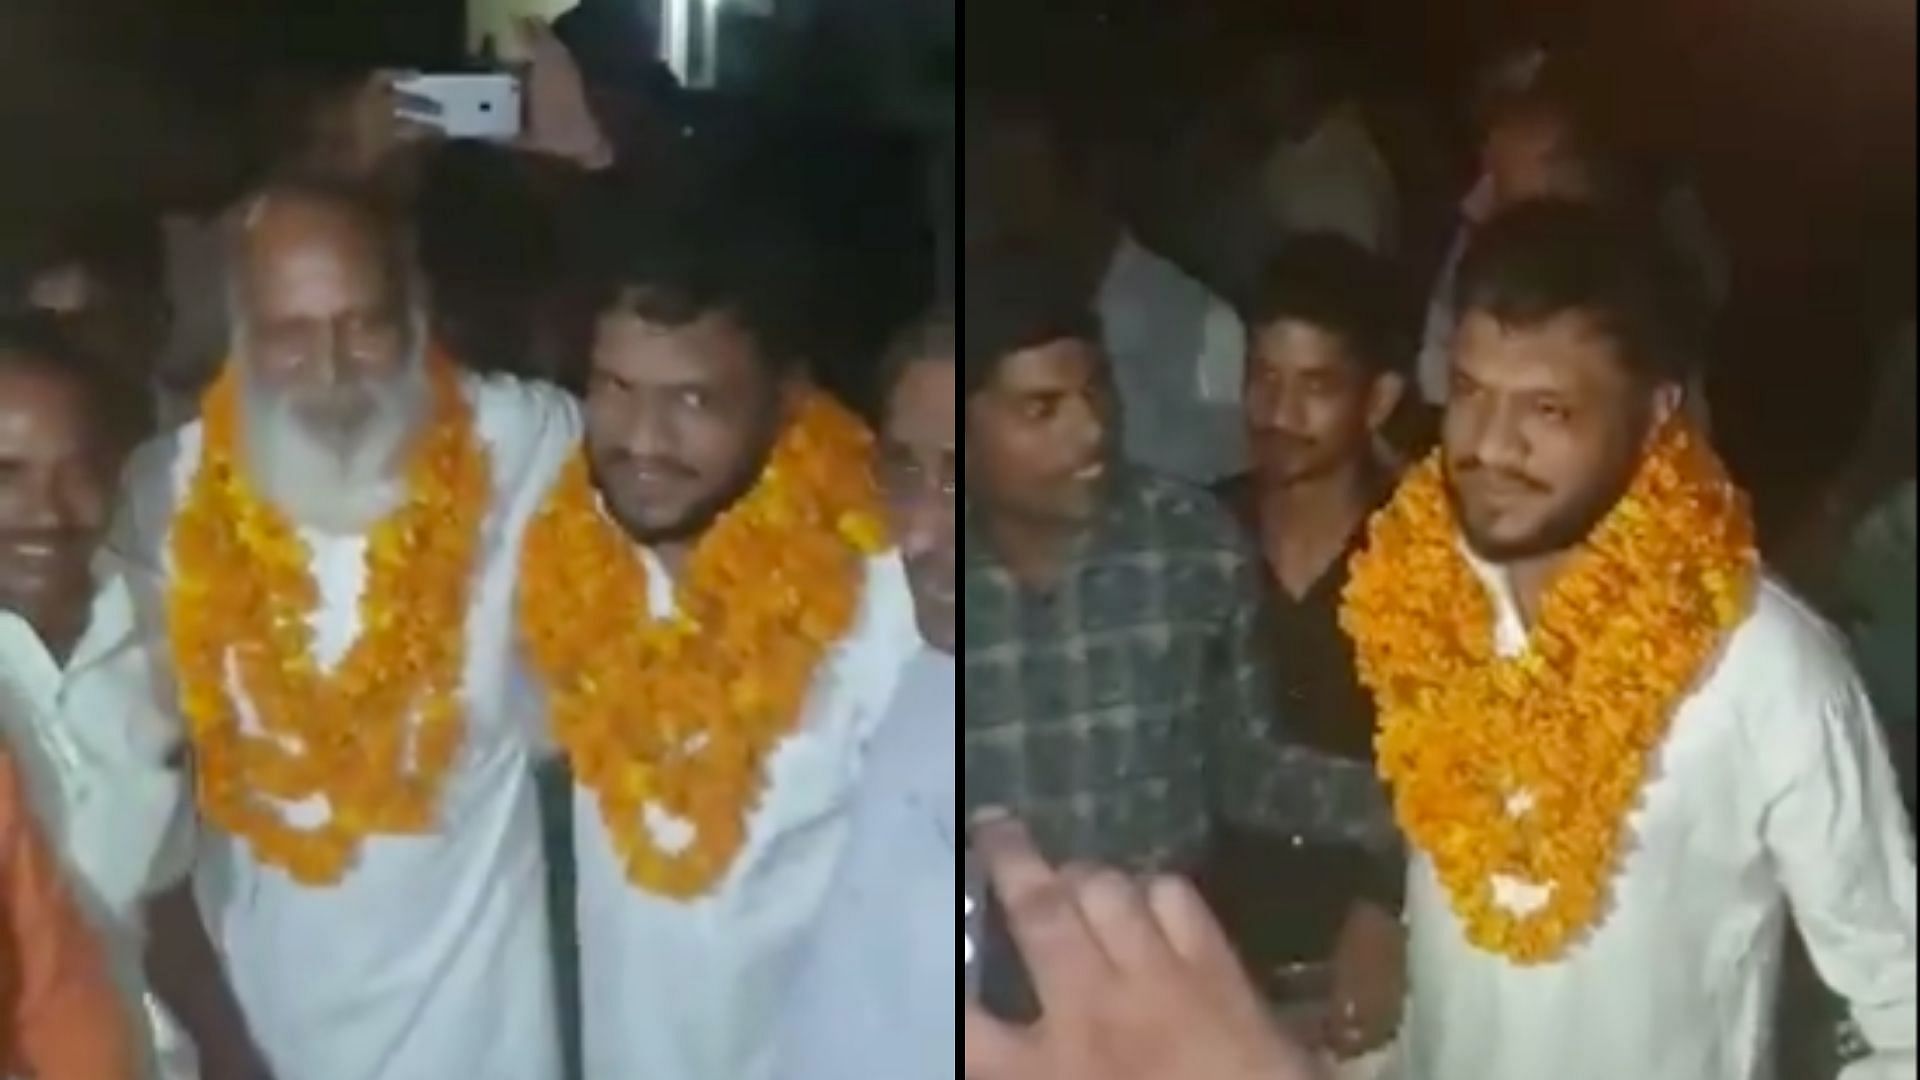 Supporters were seen taking selfies and garlanding the accused, who were released from Bulandshahr District Jail late on Saturday, 24 July, evening.